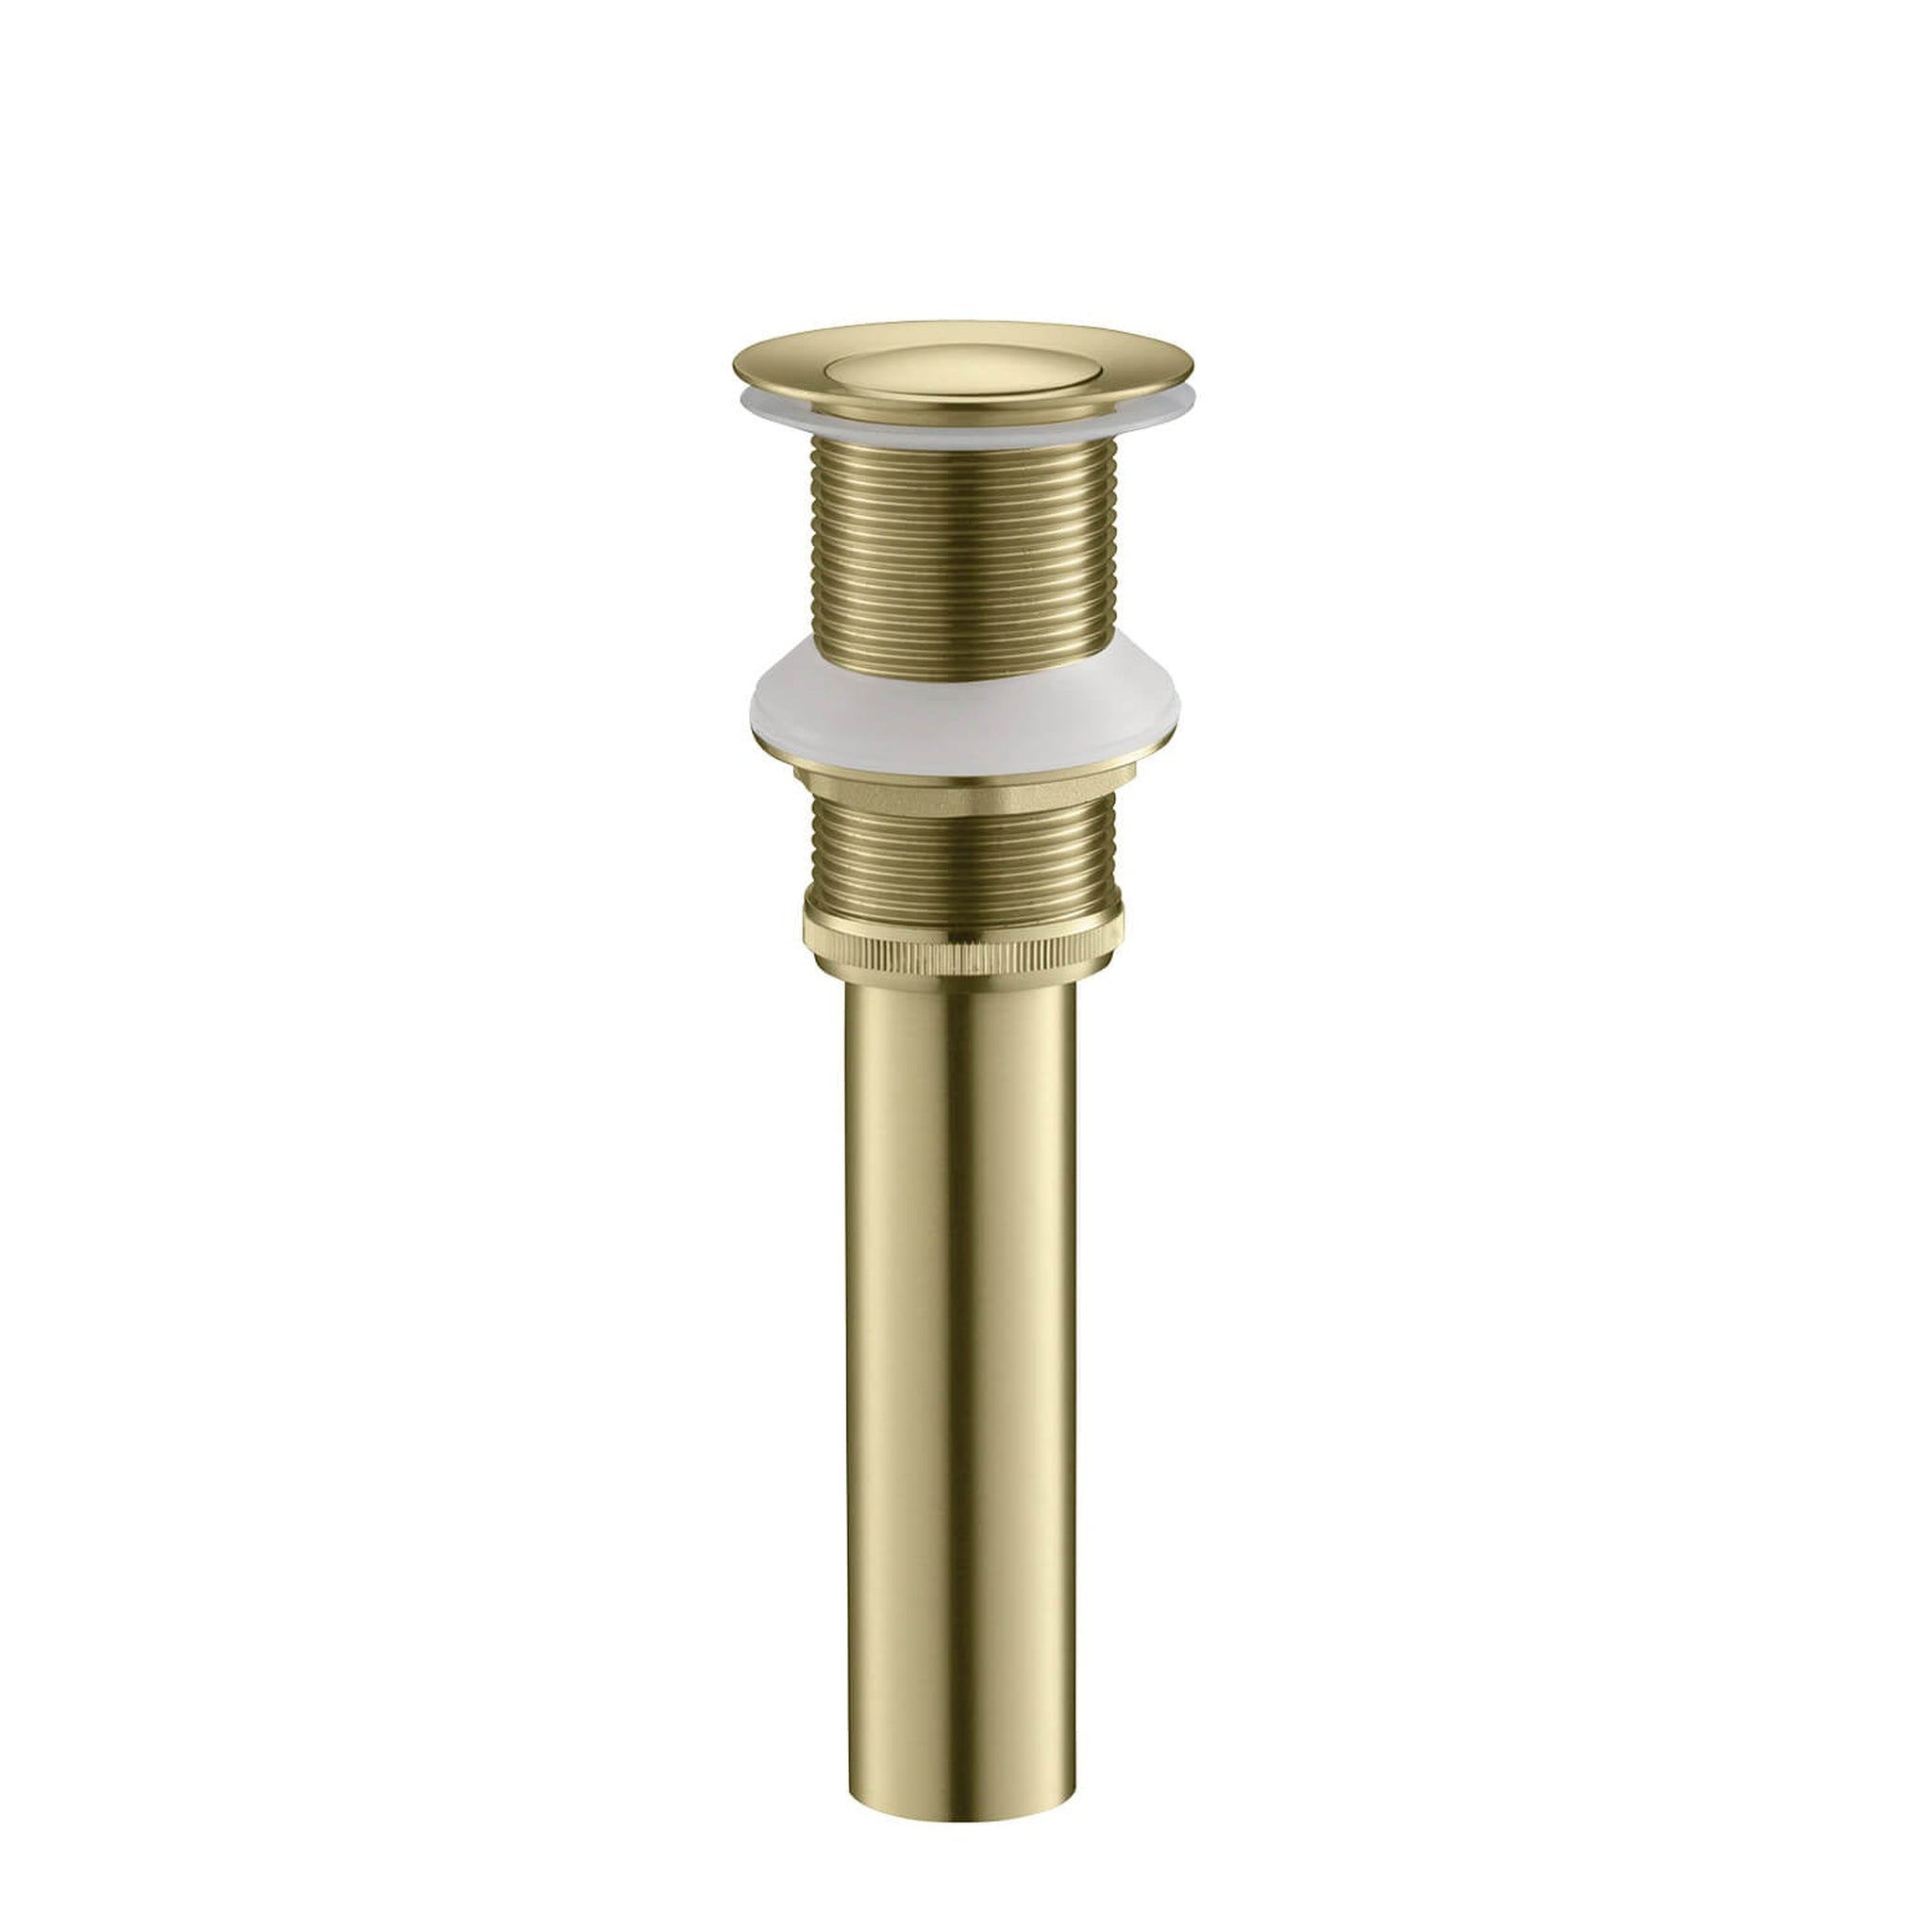 KIBI, KIBI Brass Bathroom Vessel Sink Pop-Up Drain Stopper Small Cover Without Overflow in Brushed Gold Finish